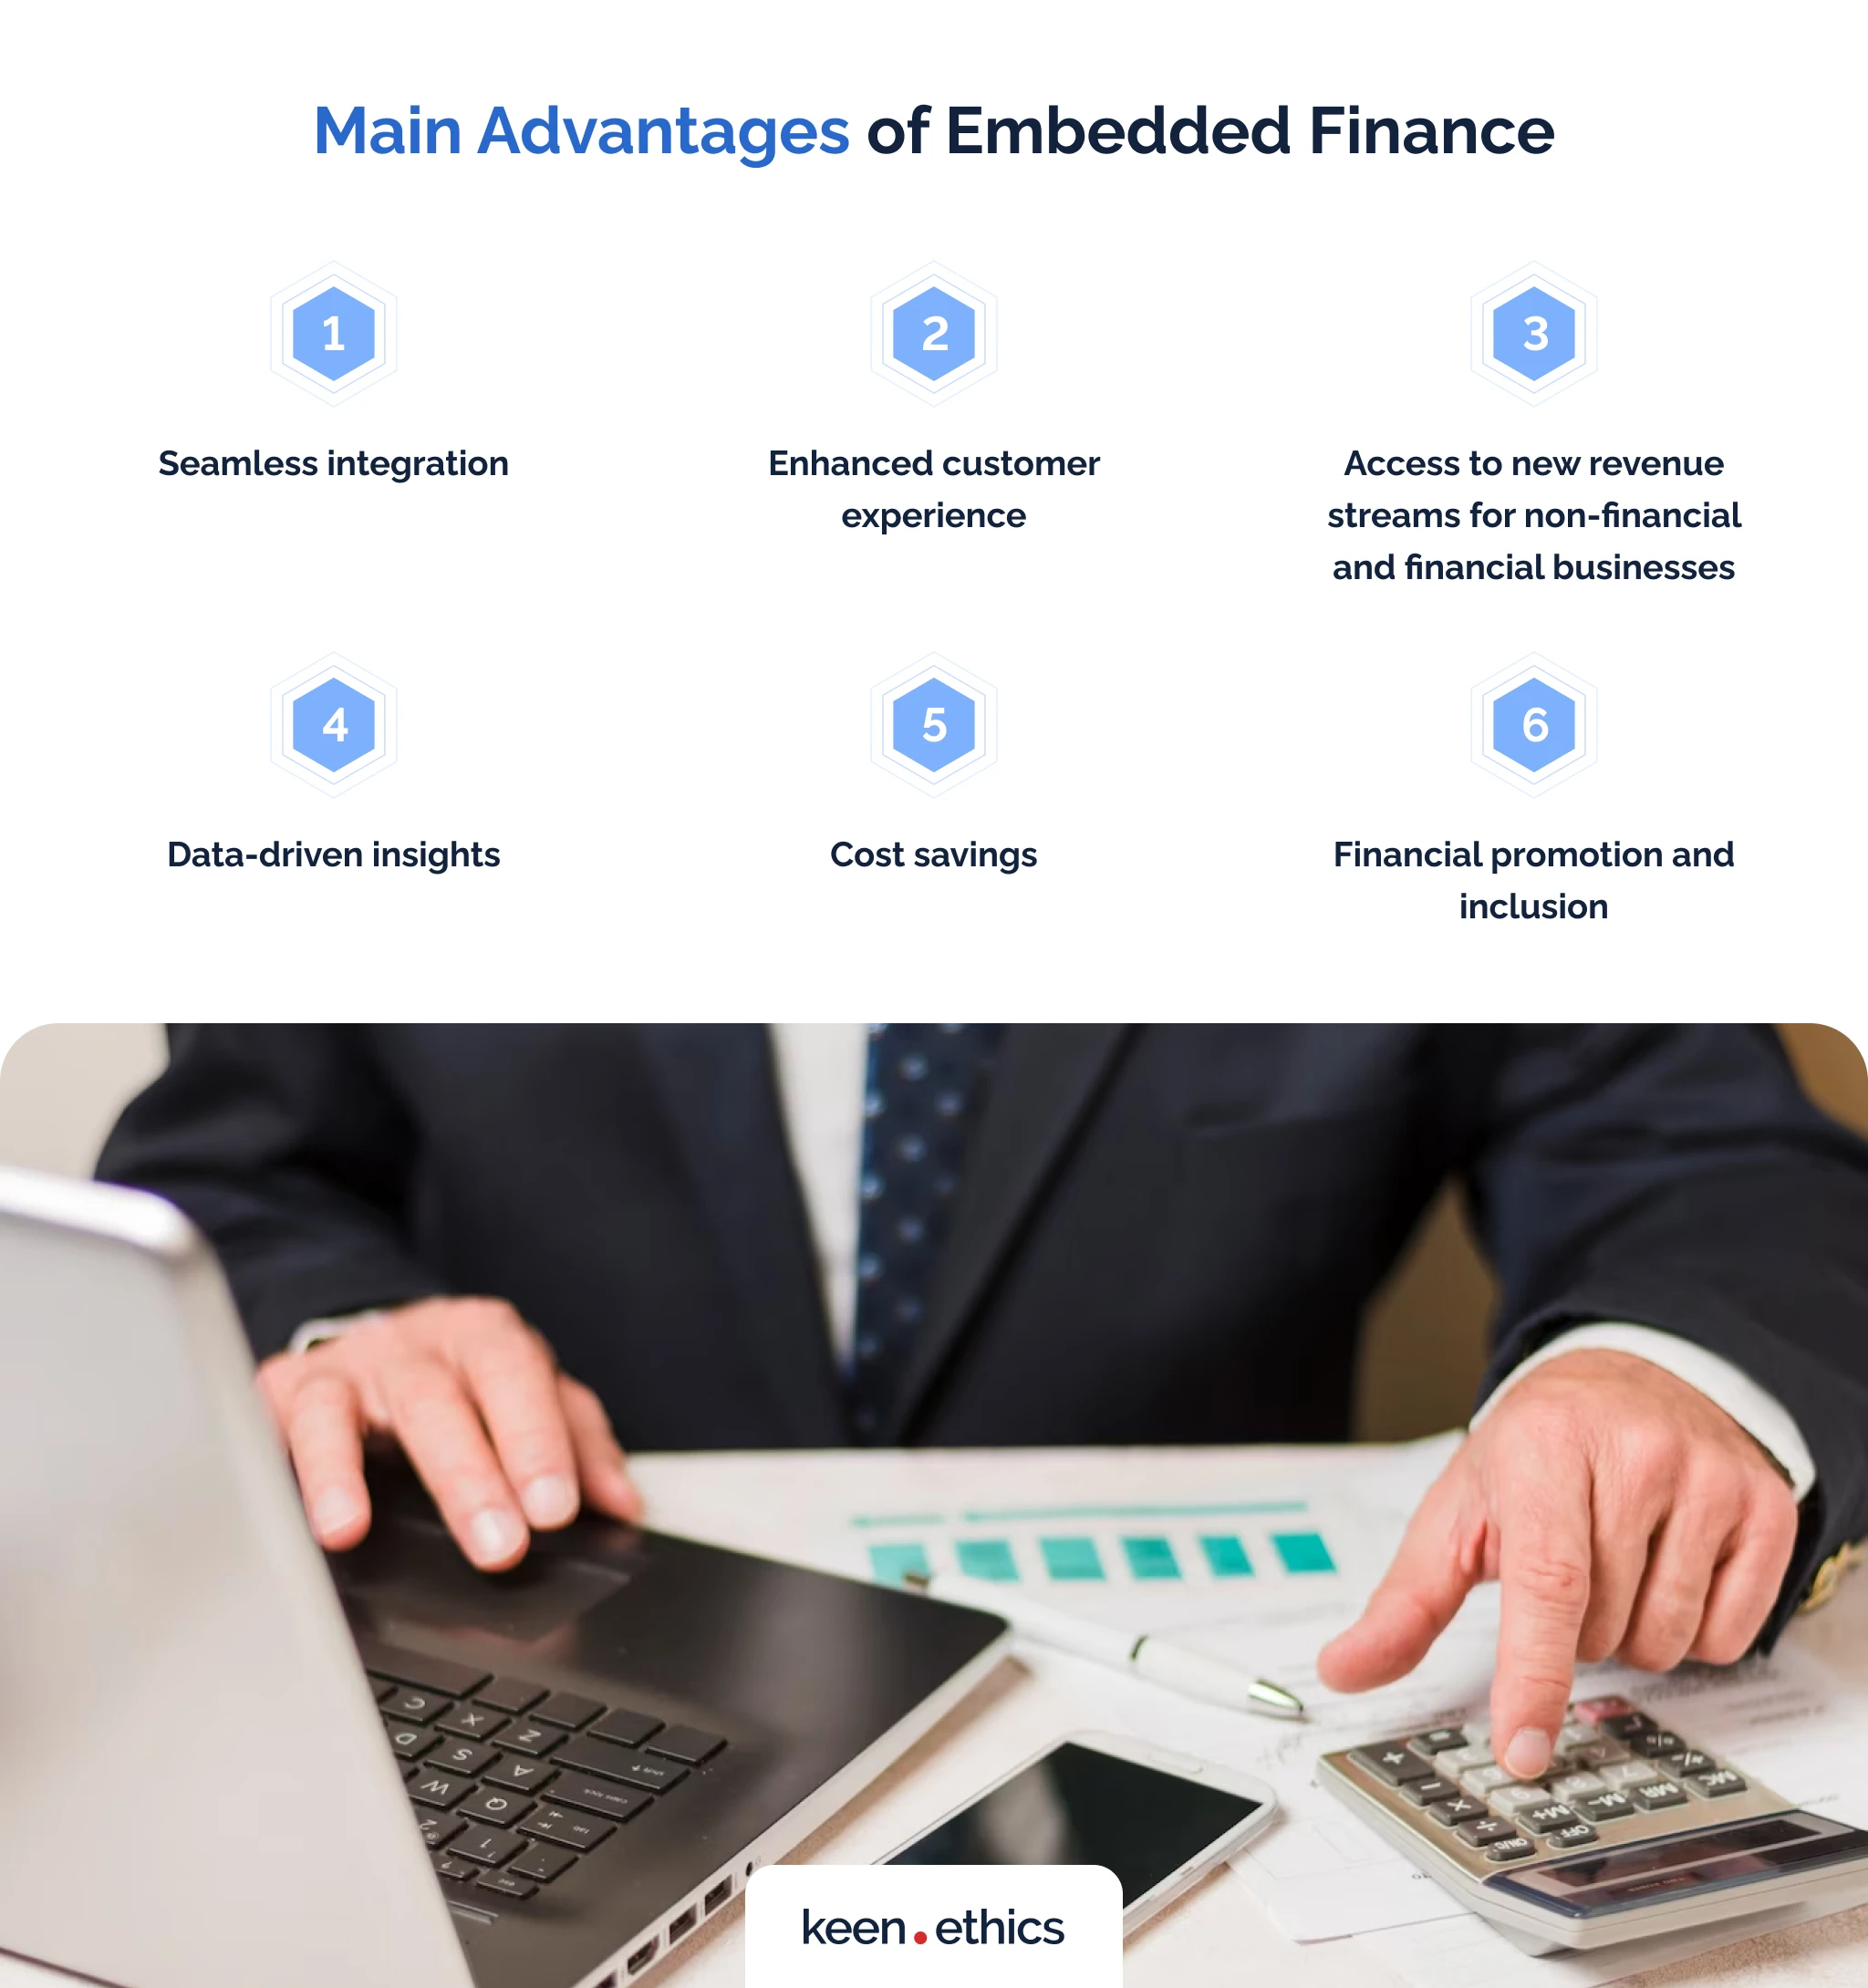 Main advantages of embedded finance